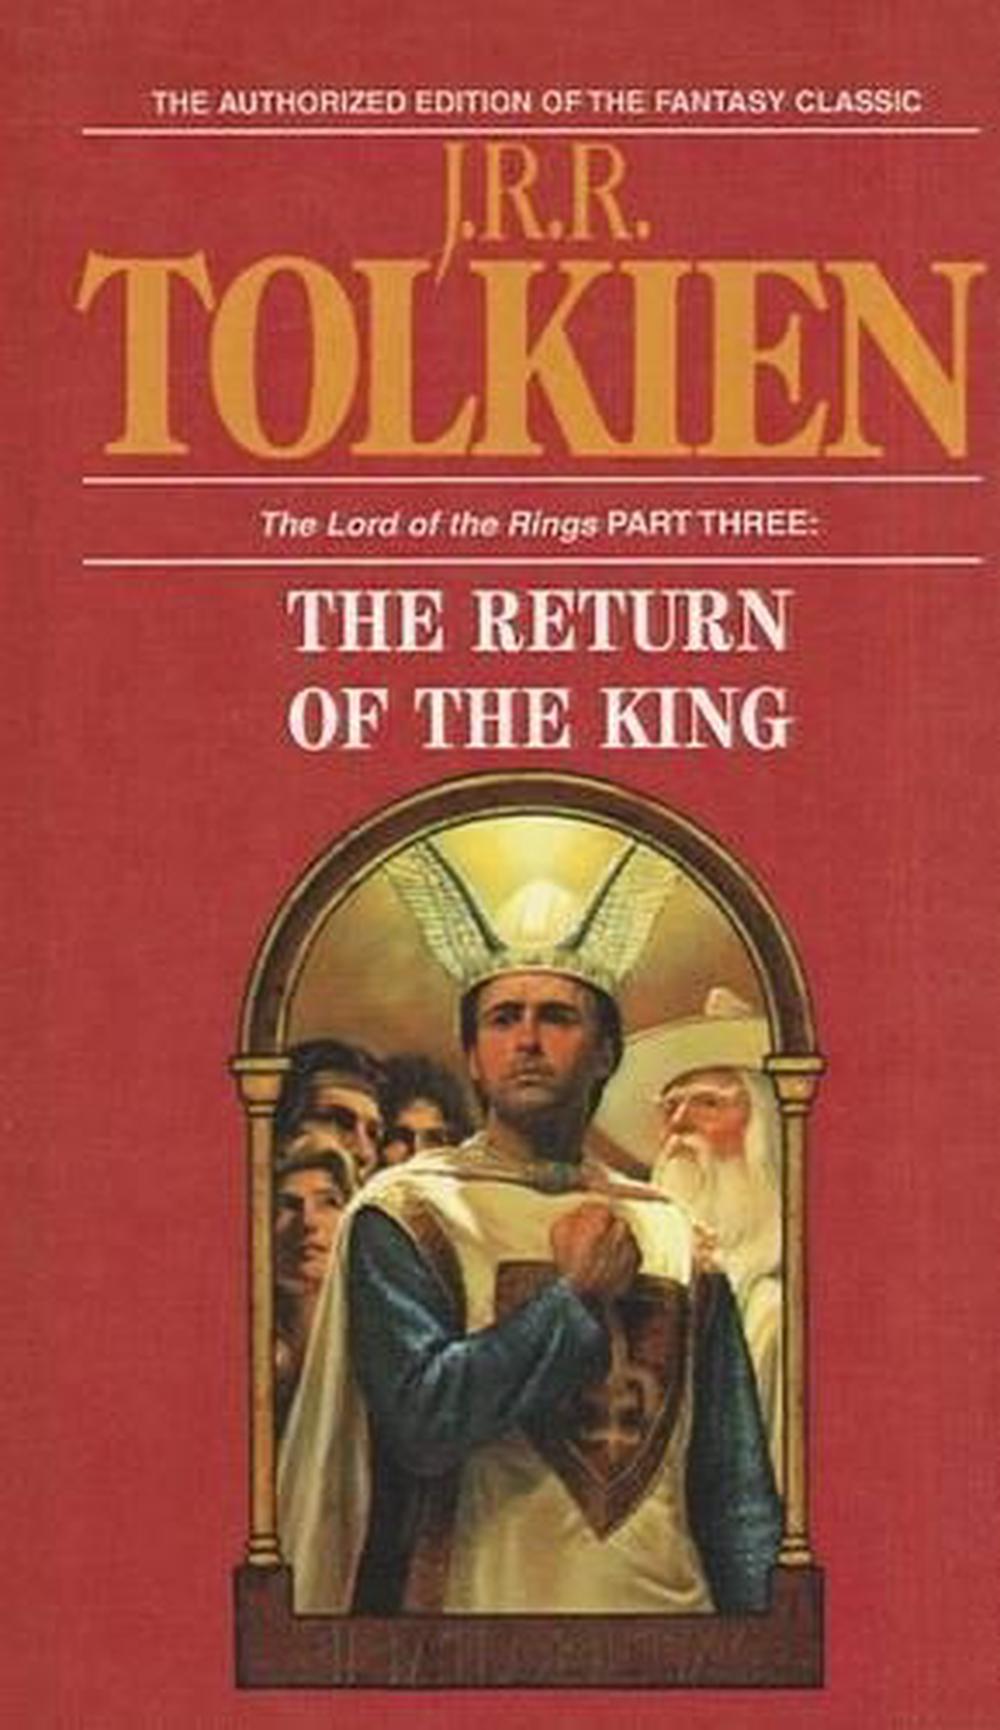 The Return Of The King By J R R Tolkien Hardcover 9780812417678 Buy Online At Moby The Great